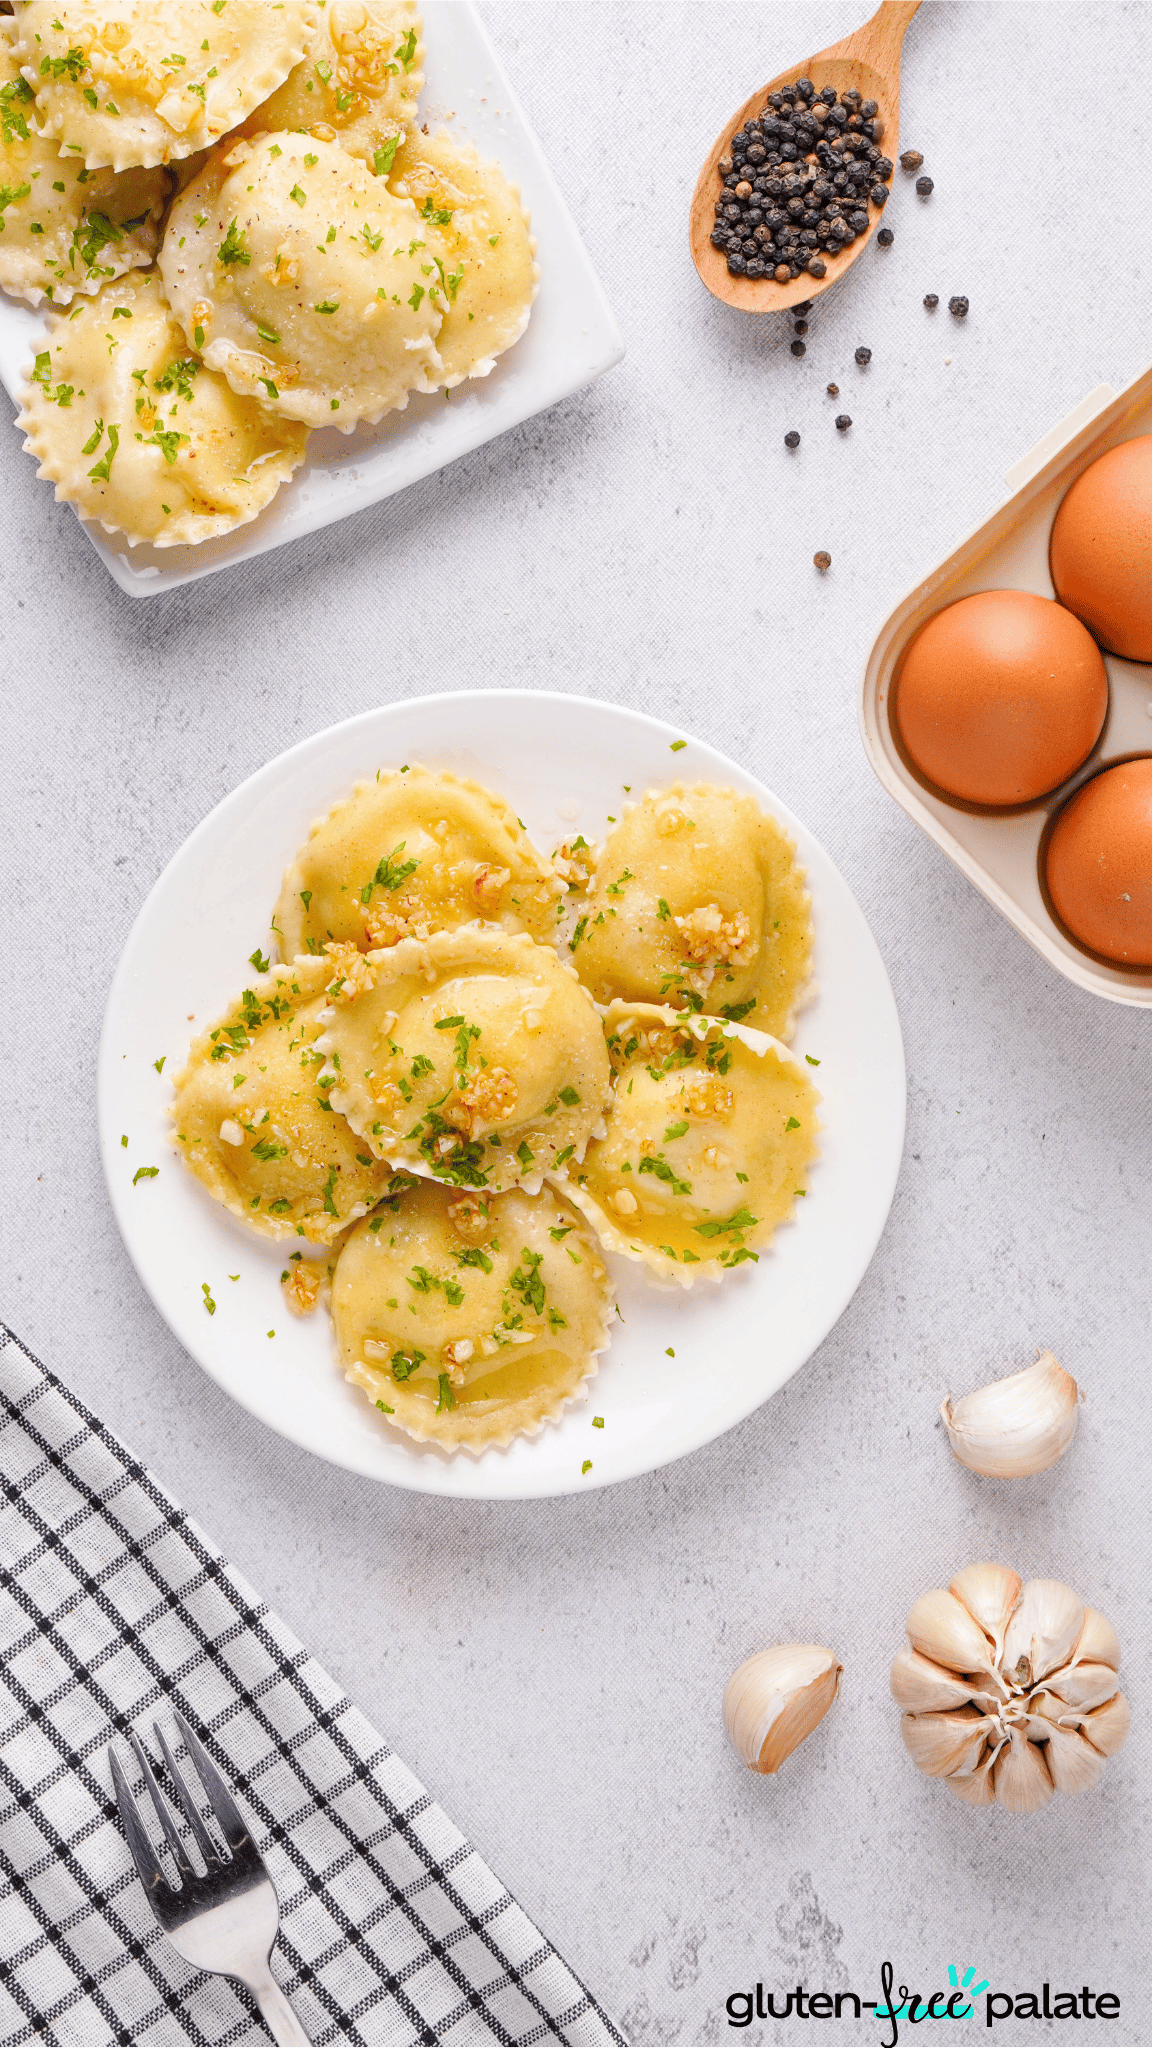 gluten-free ravioli on a white plate with eggs, peppercorns and garlic cloves.